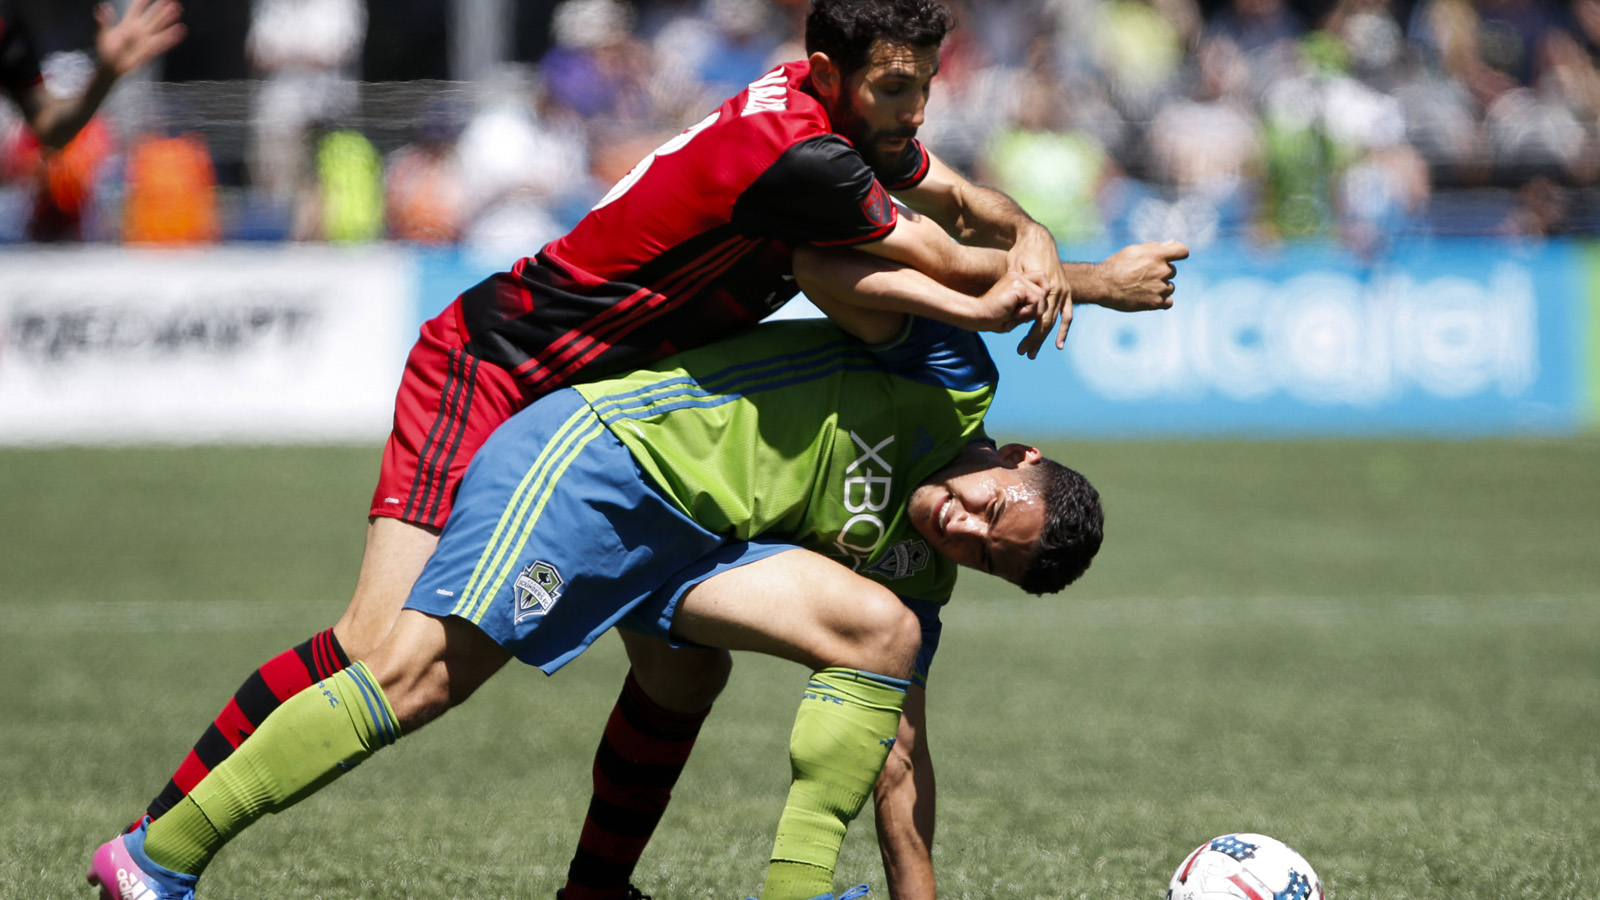 8 takeaways from the Seattle Sounders' chippy, tense win over the Portland Timbers